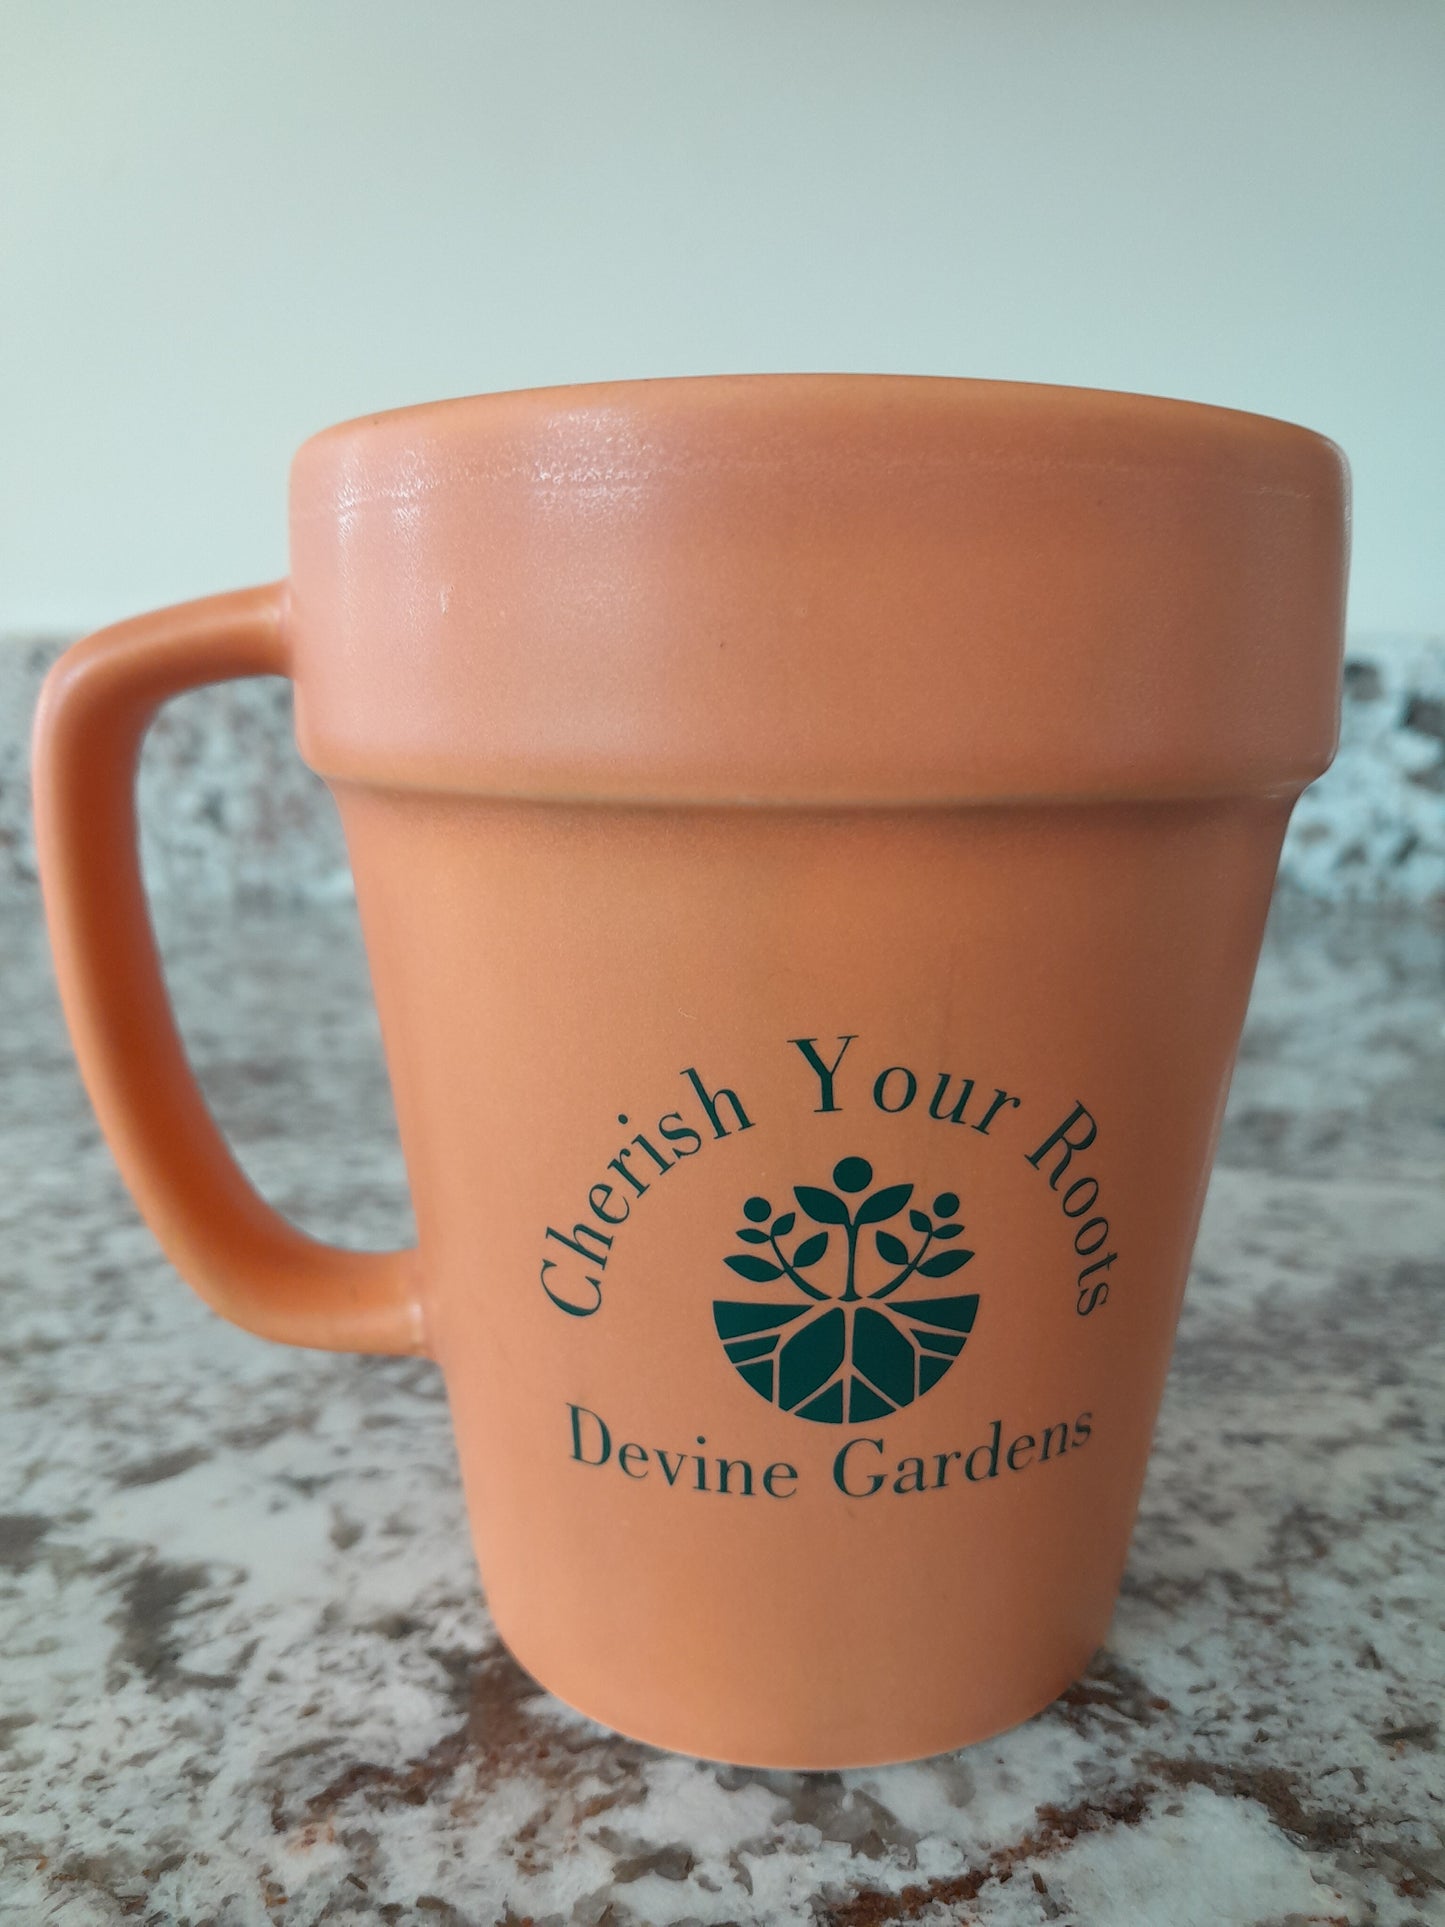 A Coffee Cup for Gardeners ships free with 4-quart bag